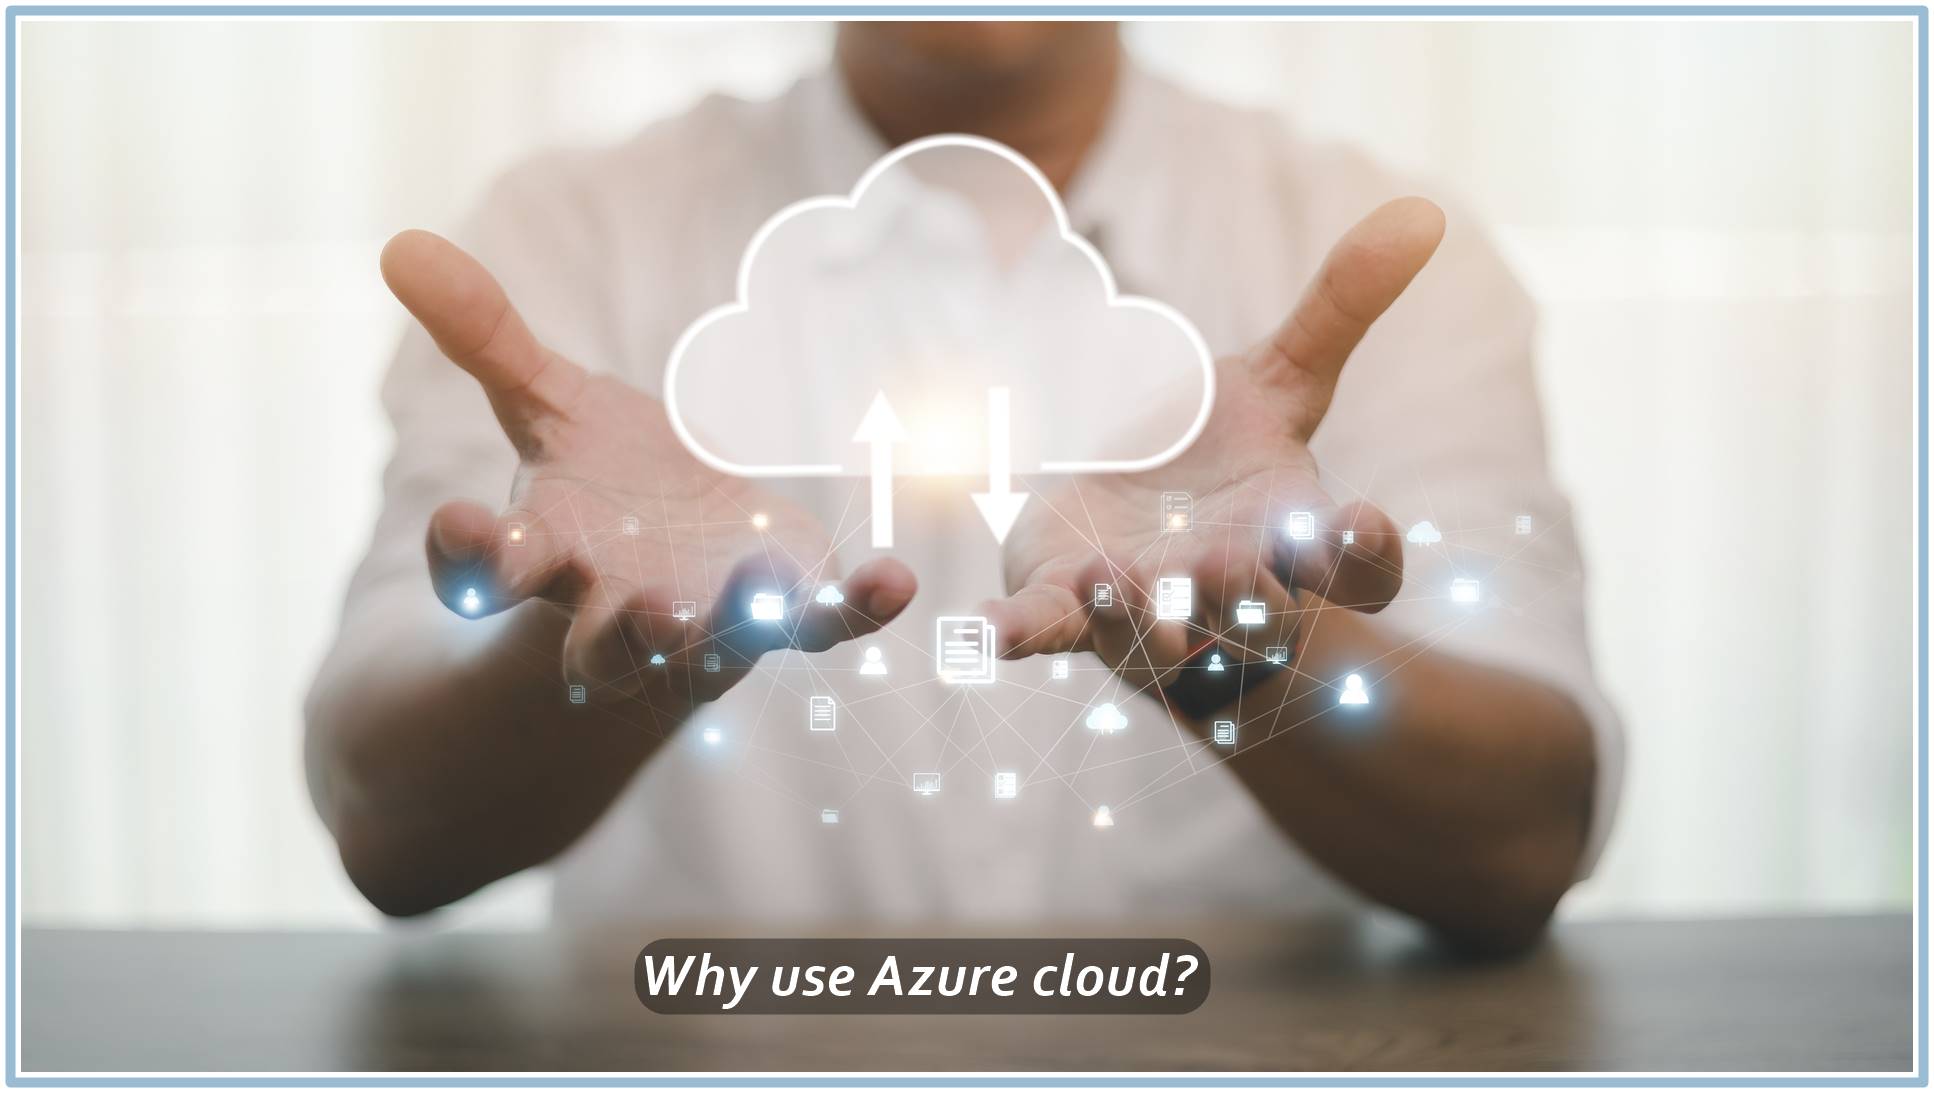 Why use Azure cloud?